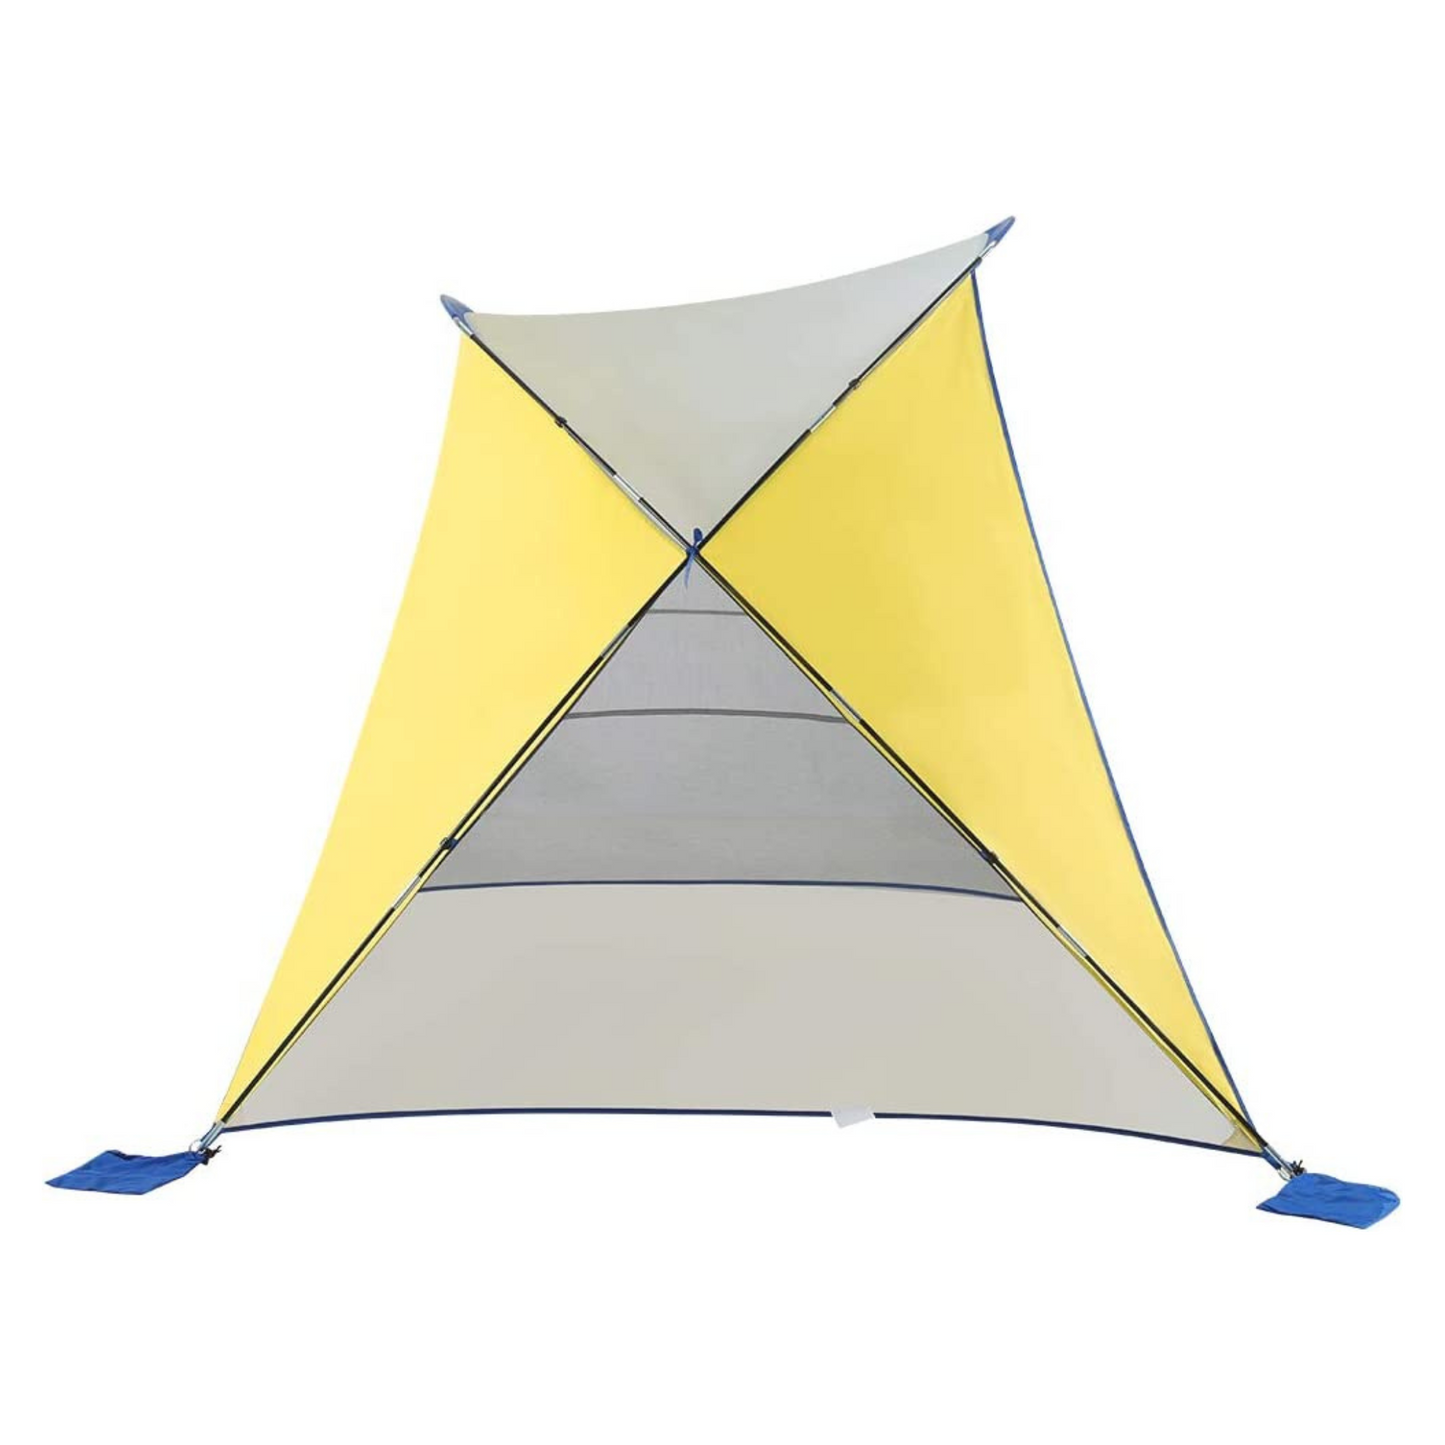 Portal® 9' x 6' Easy-Up Sun Shelter with Included Carry Bag, Yellow/Blue